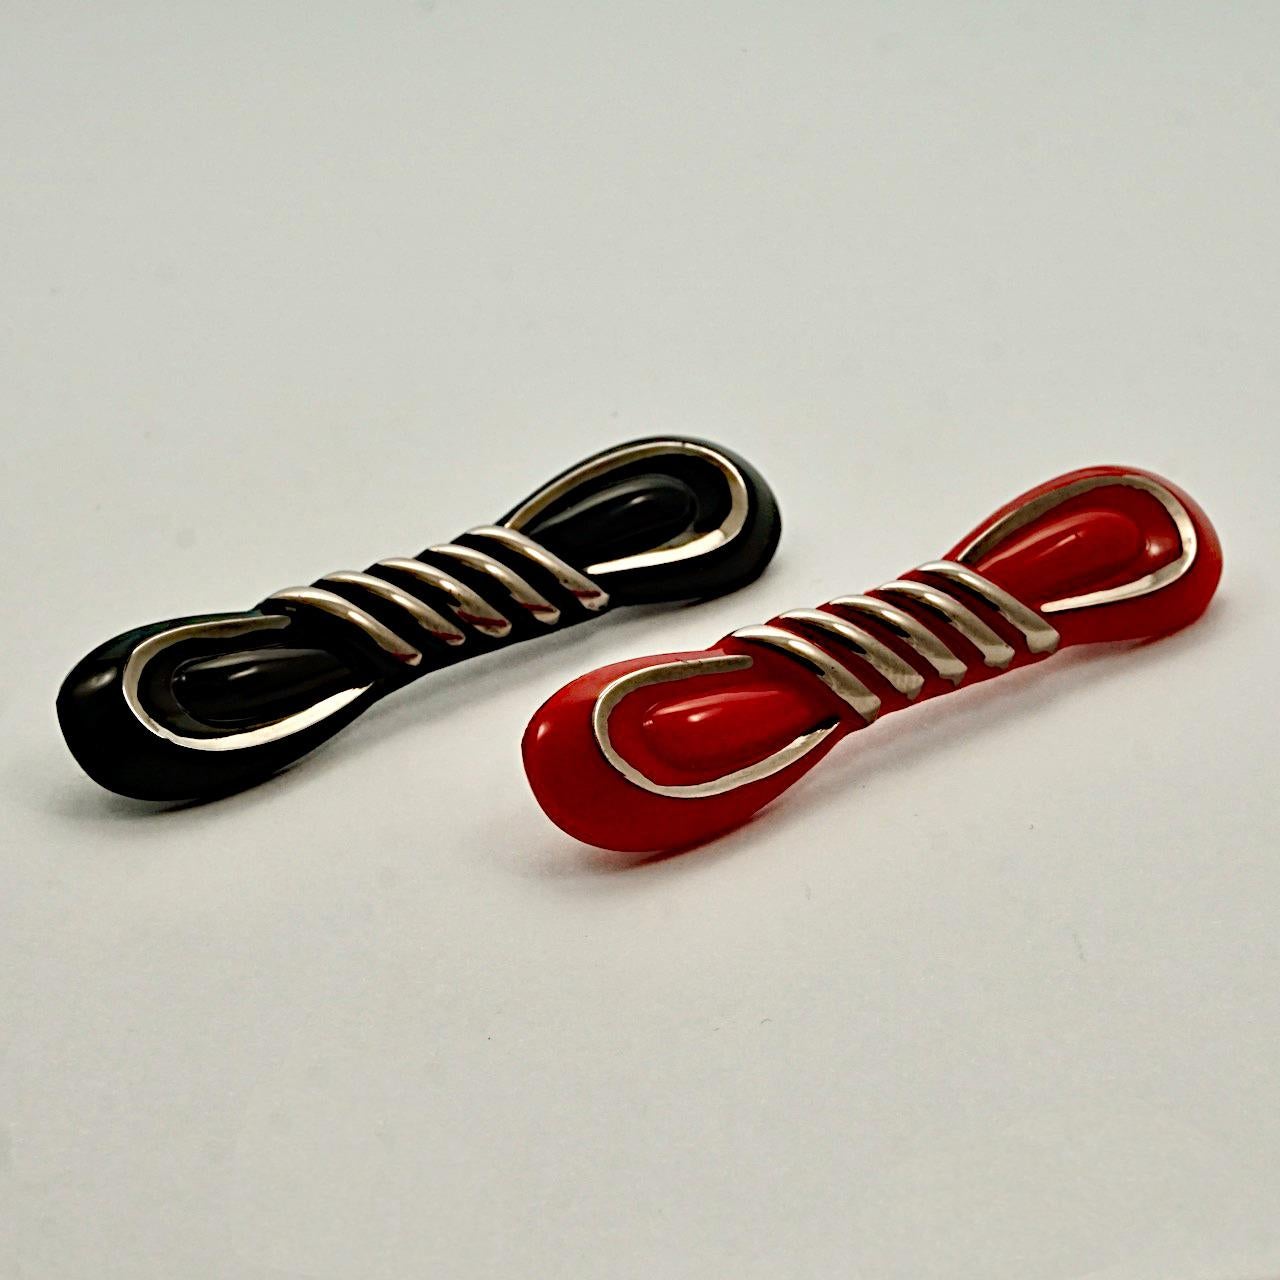 Wonderful Art Deco pair of red and black glass bow brooches, with silver tone highlights. Measuring length 6.6 cm / 2.5 inches by width 1.4 cm / .55 inch.

These are very stylish and unusual brooches in red and black glass, from the 1930s. 